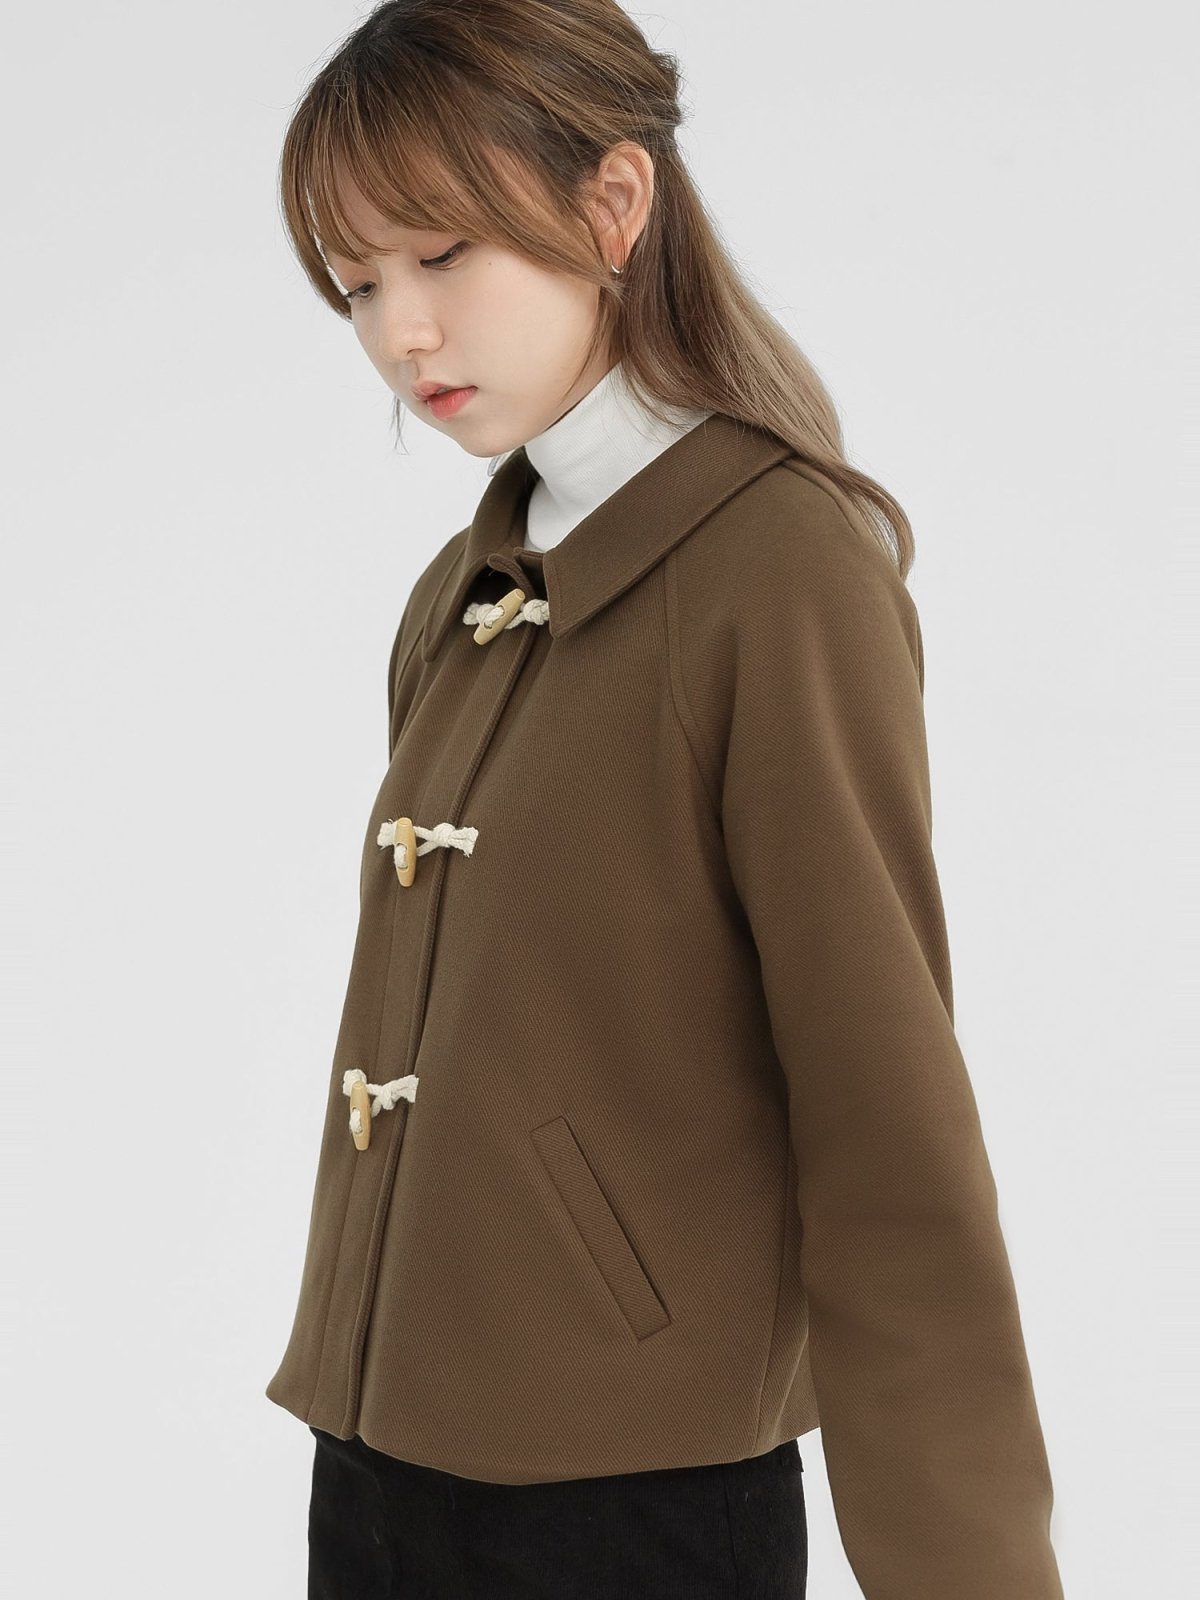 Clover Cropped Duffle Coat - DAG-DD1284-23BrownieS - Brownie - S - D'zage Designs